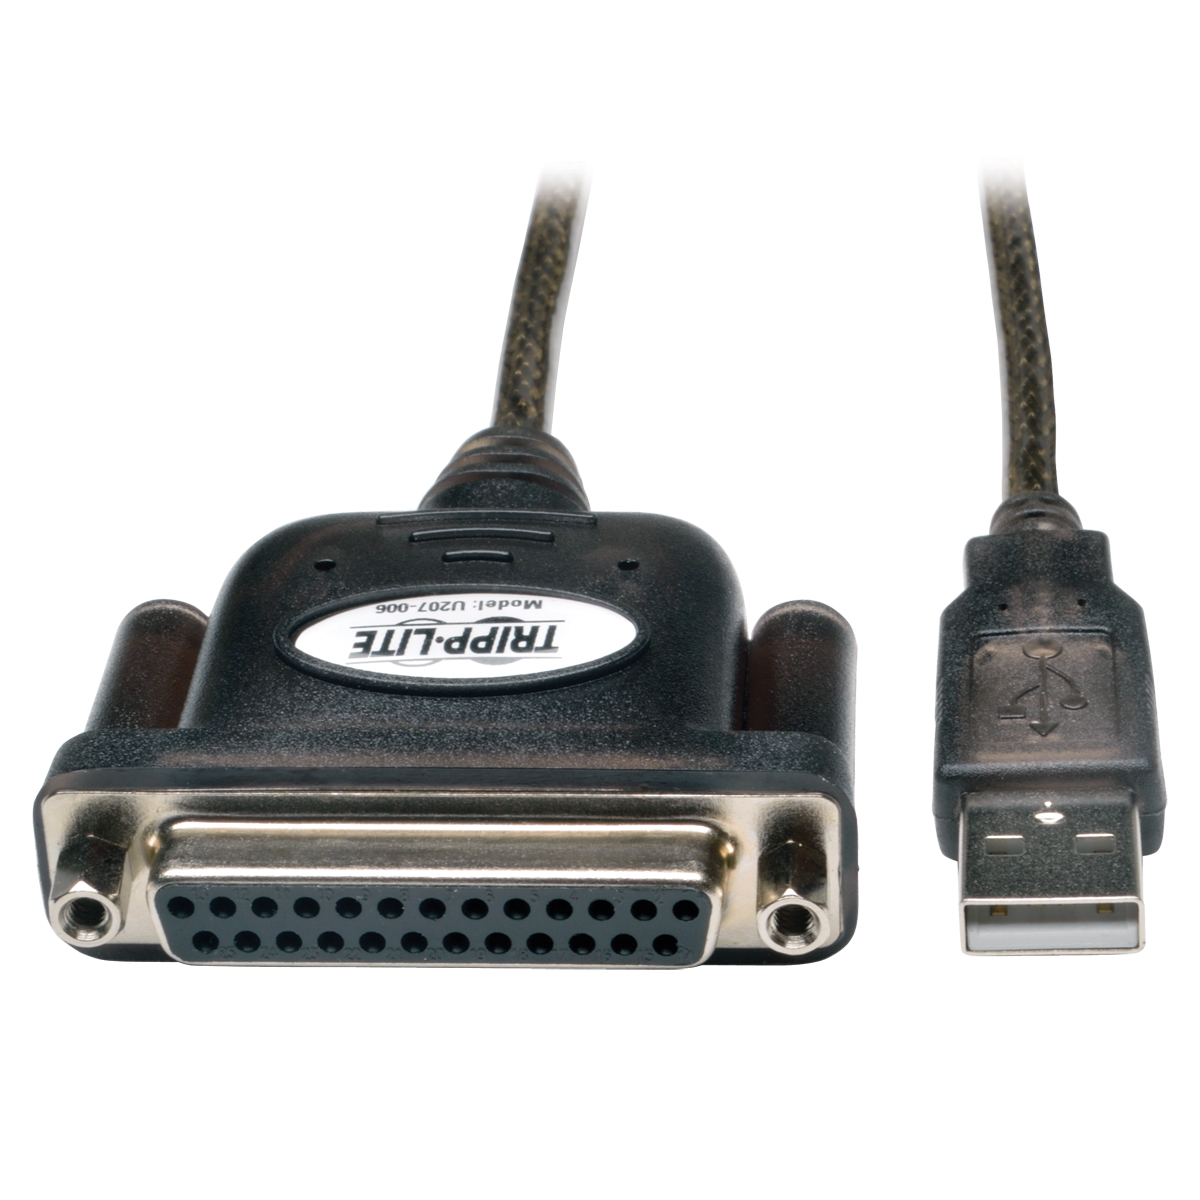 Tripp Lite U207-006 USB to Parallel Printer Adapter Cable; 6' | Quill.com